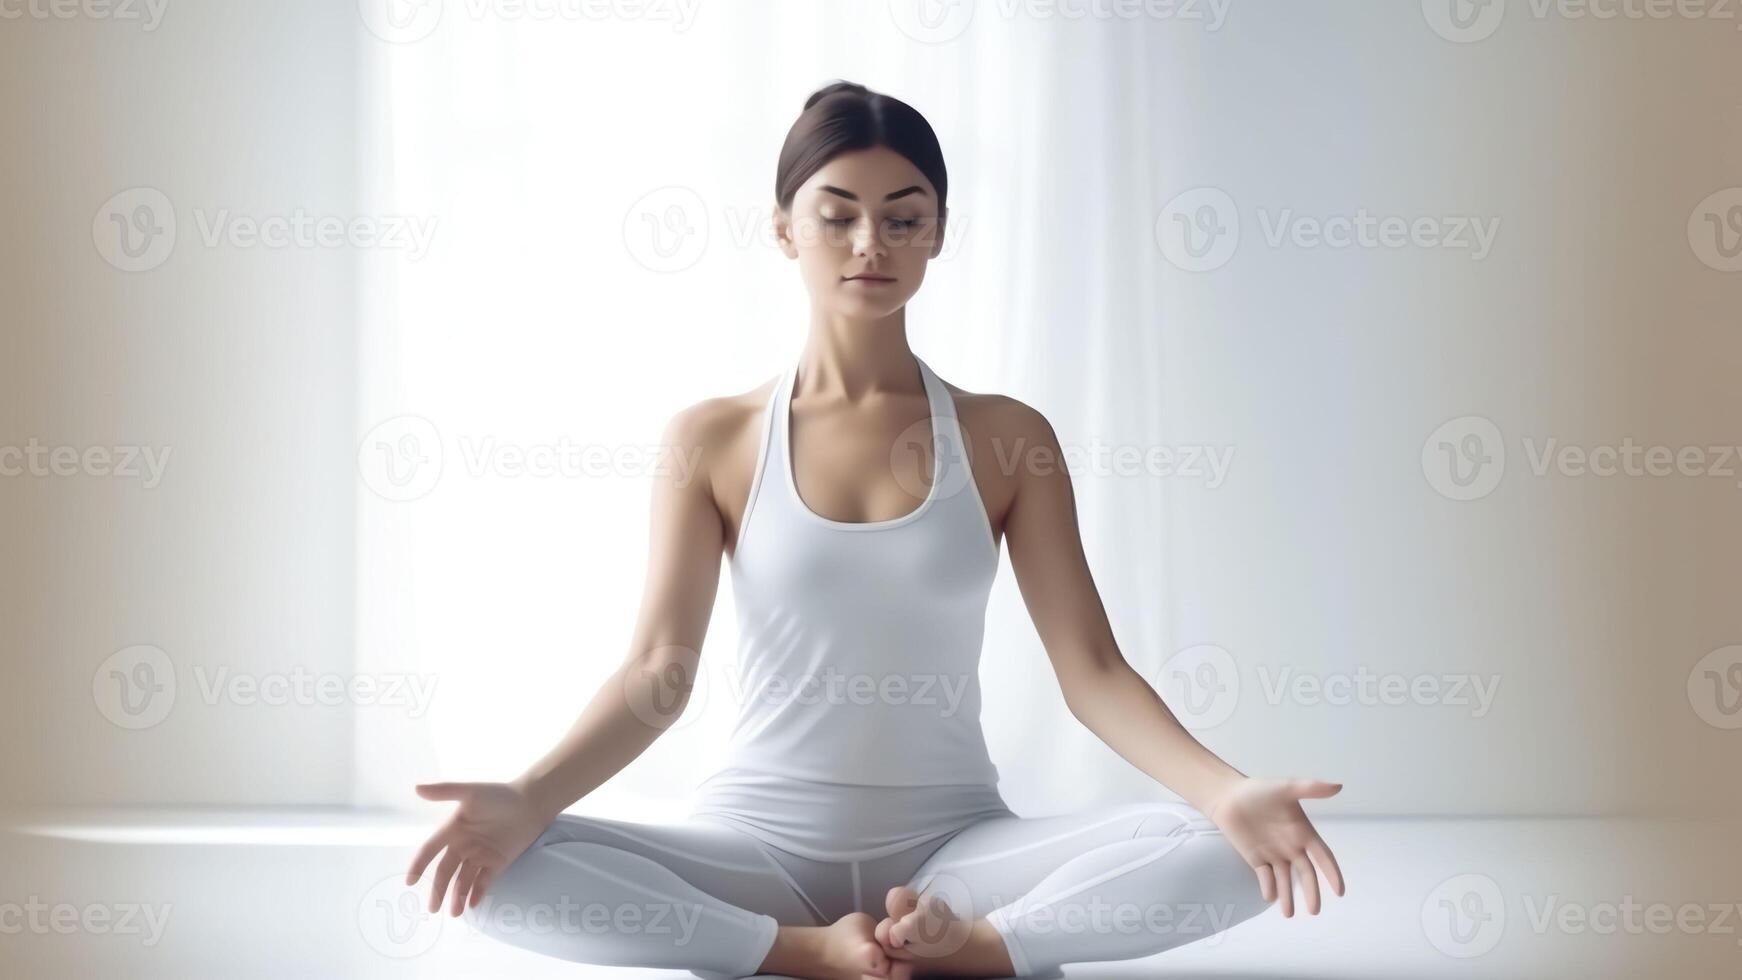 AI Generative Young sporty attractive woman practicing yoga doing Ardha Padmasana exercise meditating in Half Lotus pose with mudra gesture working out wearing sportswear indoor full length whit photo